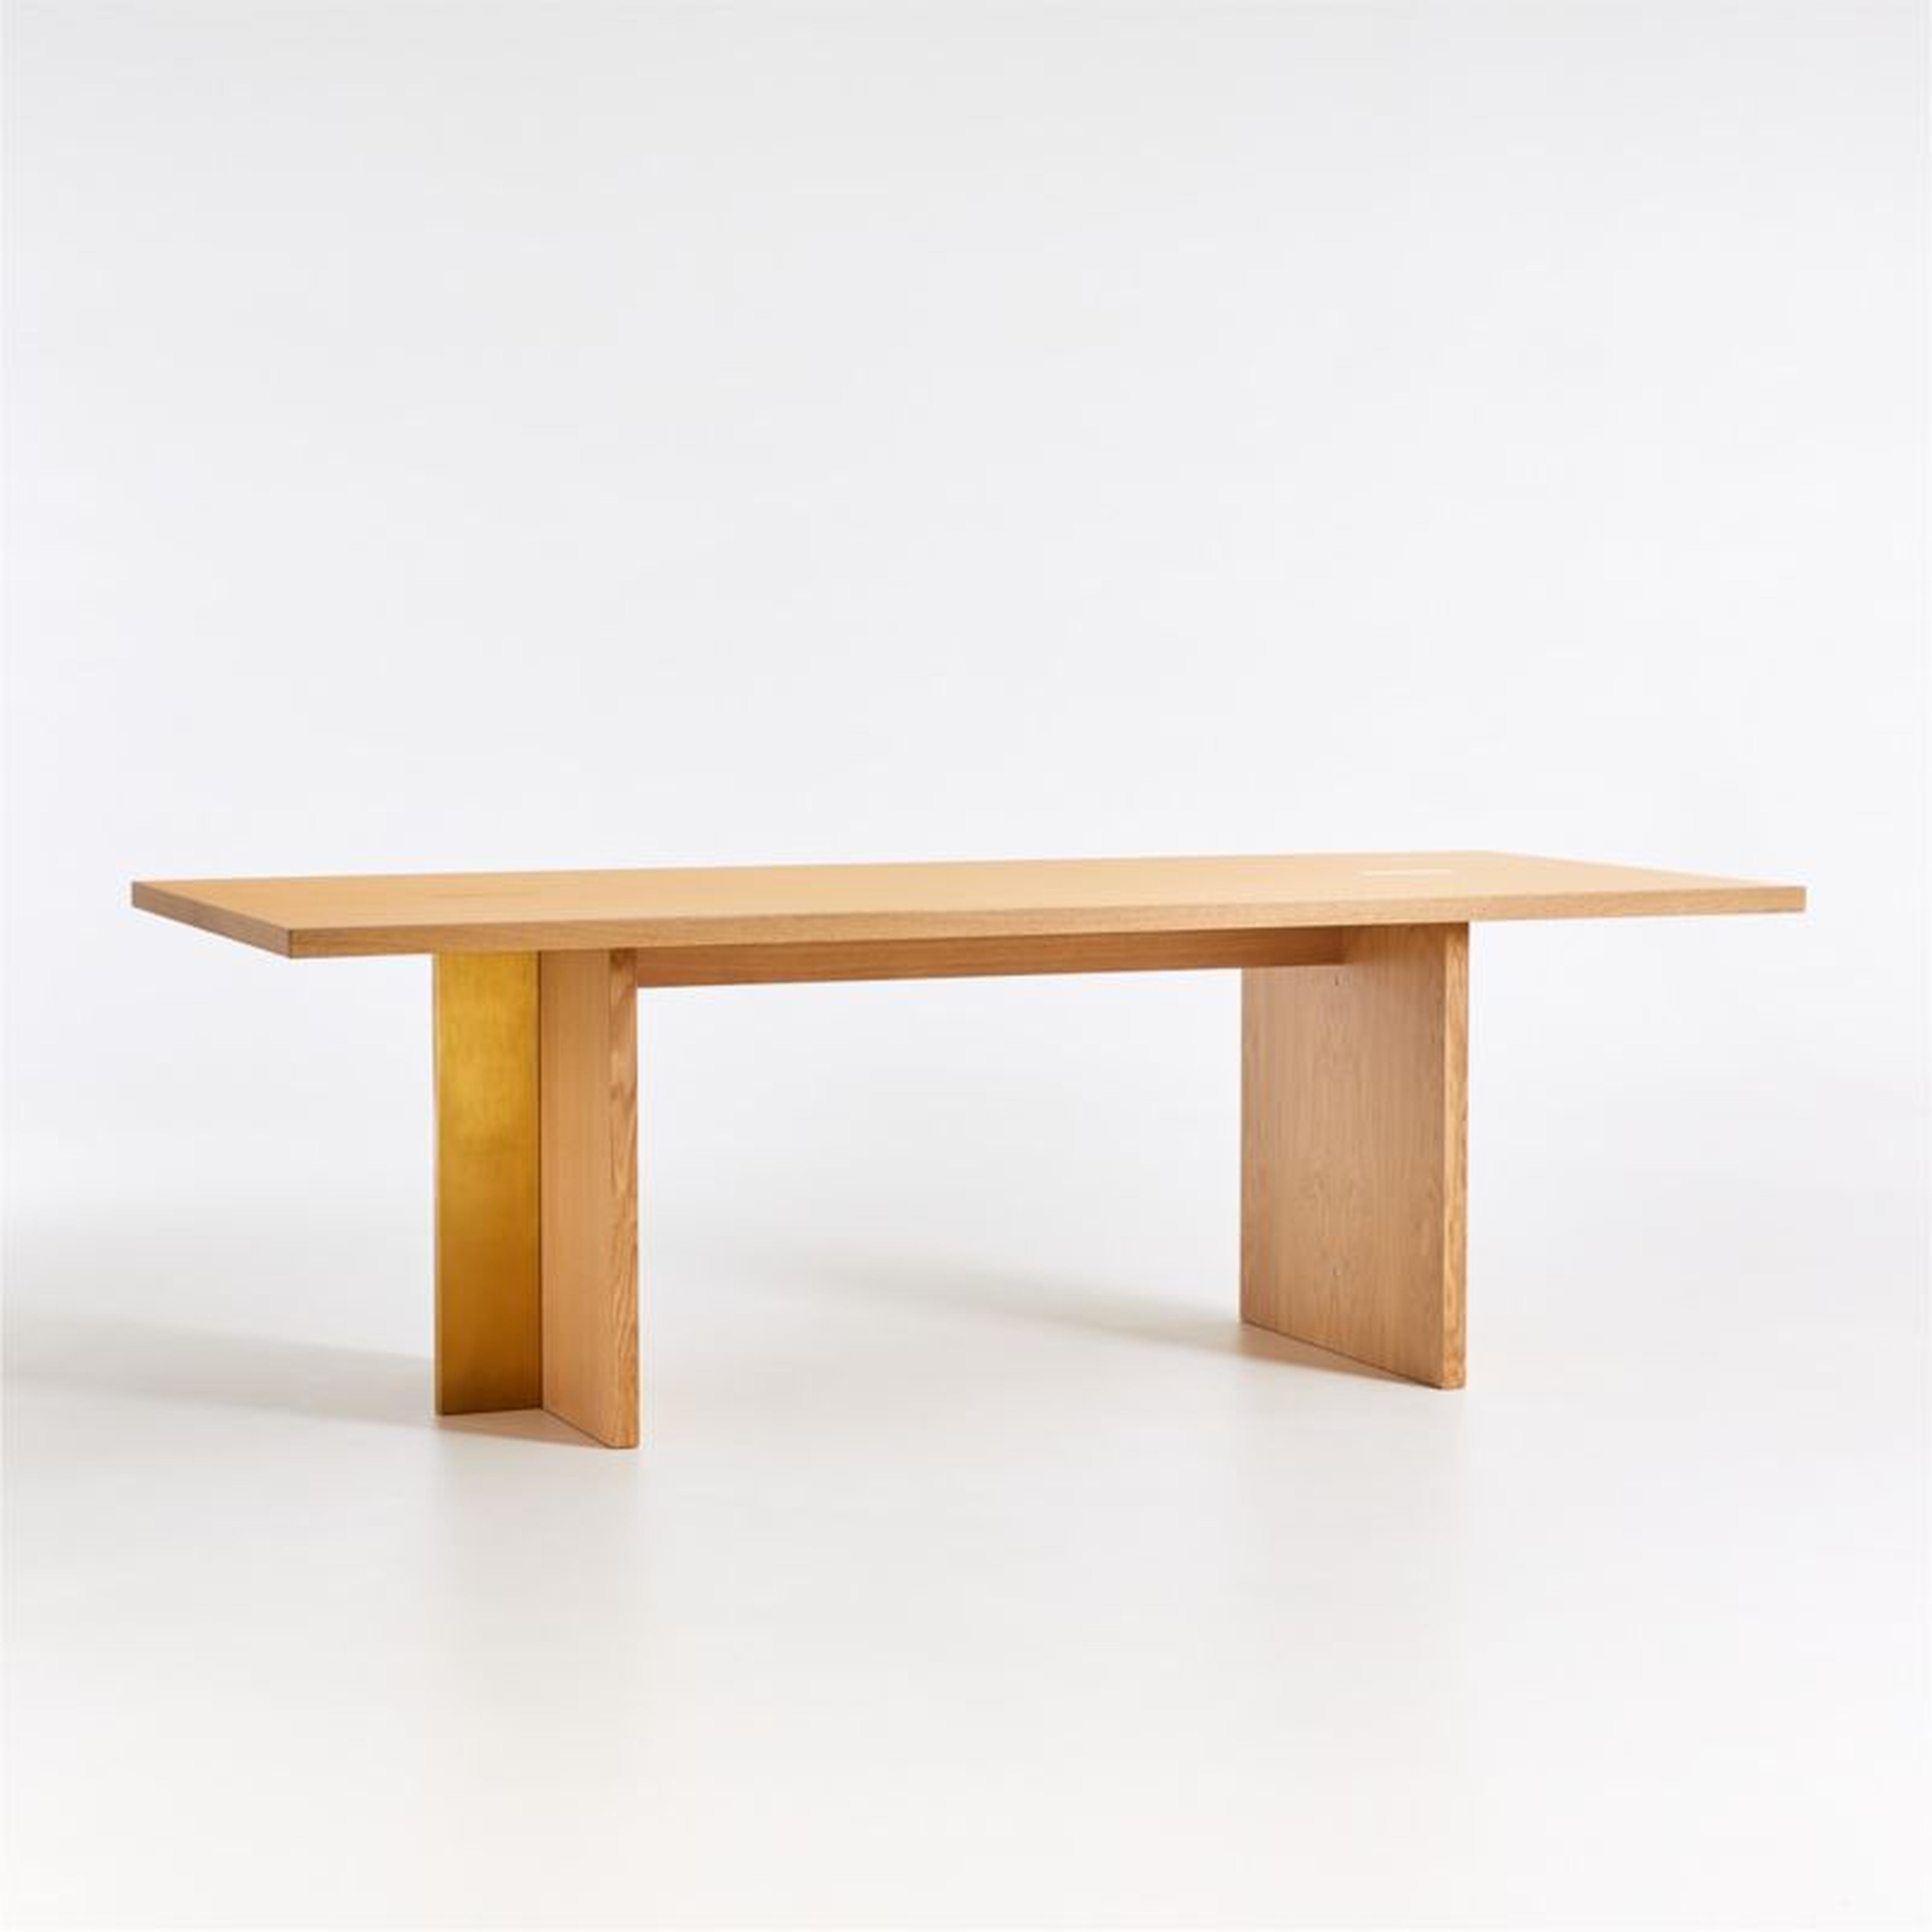 Paradox 89" Natural Oak Dining Table - Crate and Barrel